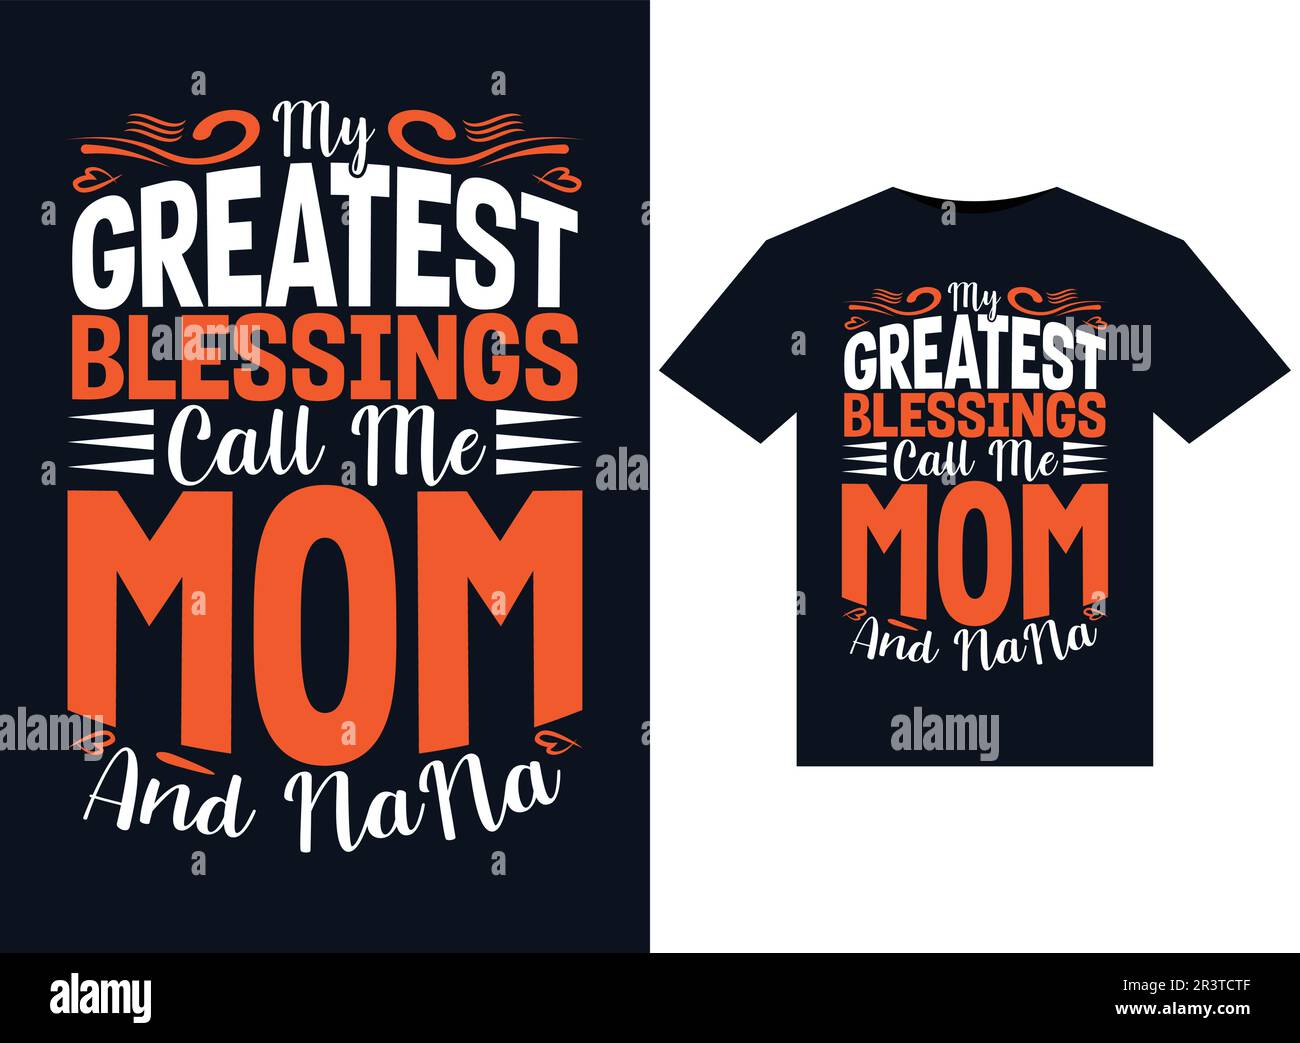 My Greatest Blessings Call Me Mom And NaNa illustrations for print-ready T-Shirts design Stock Vector